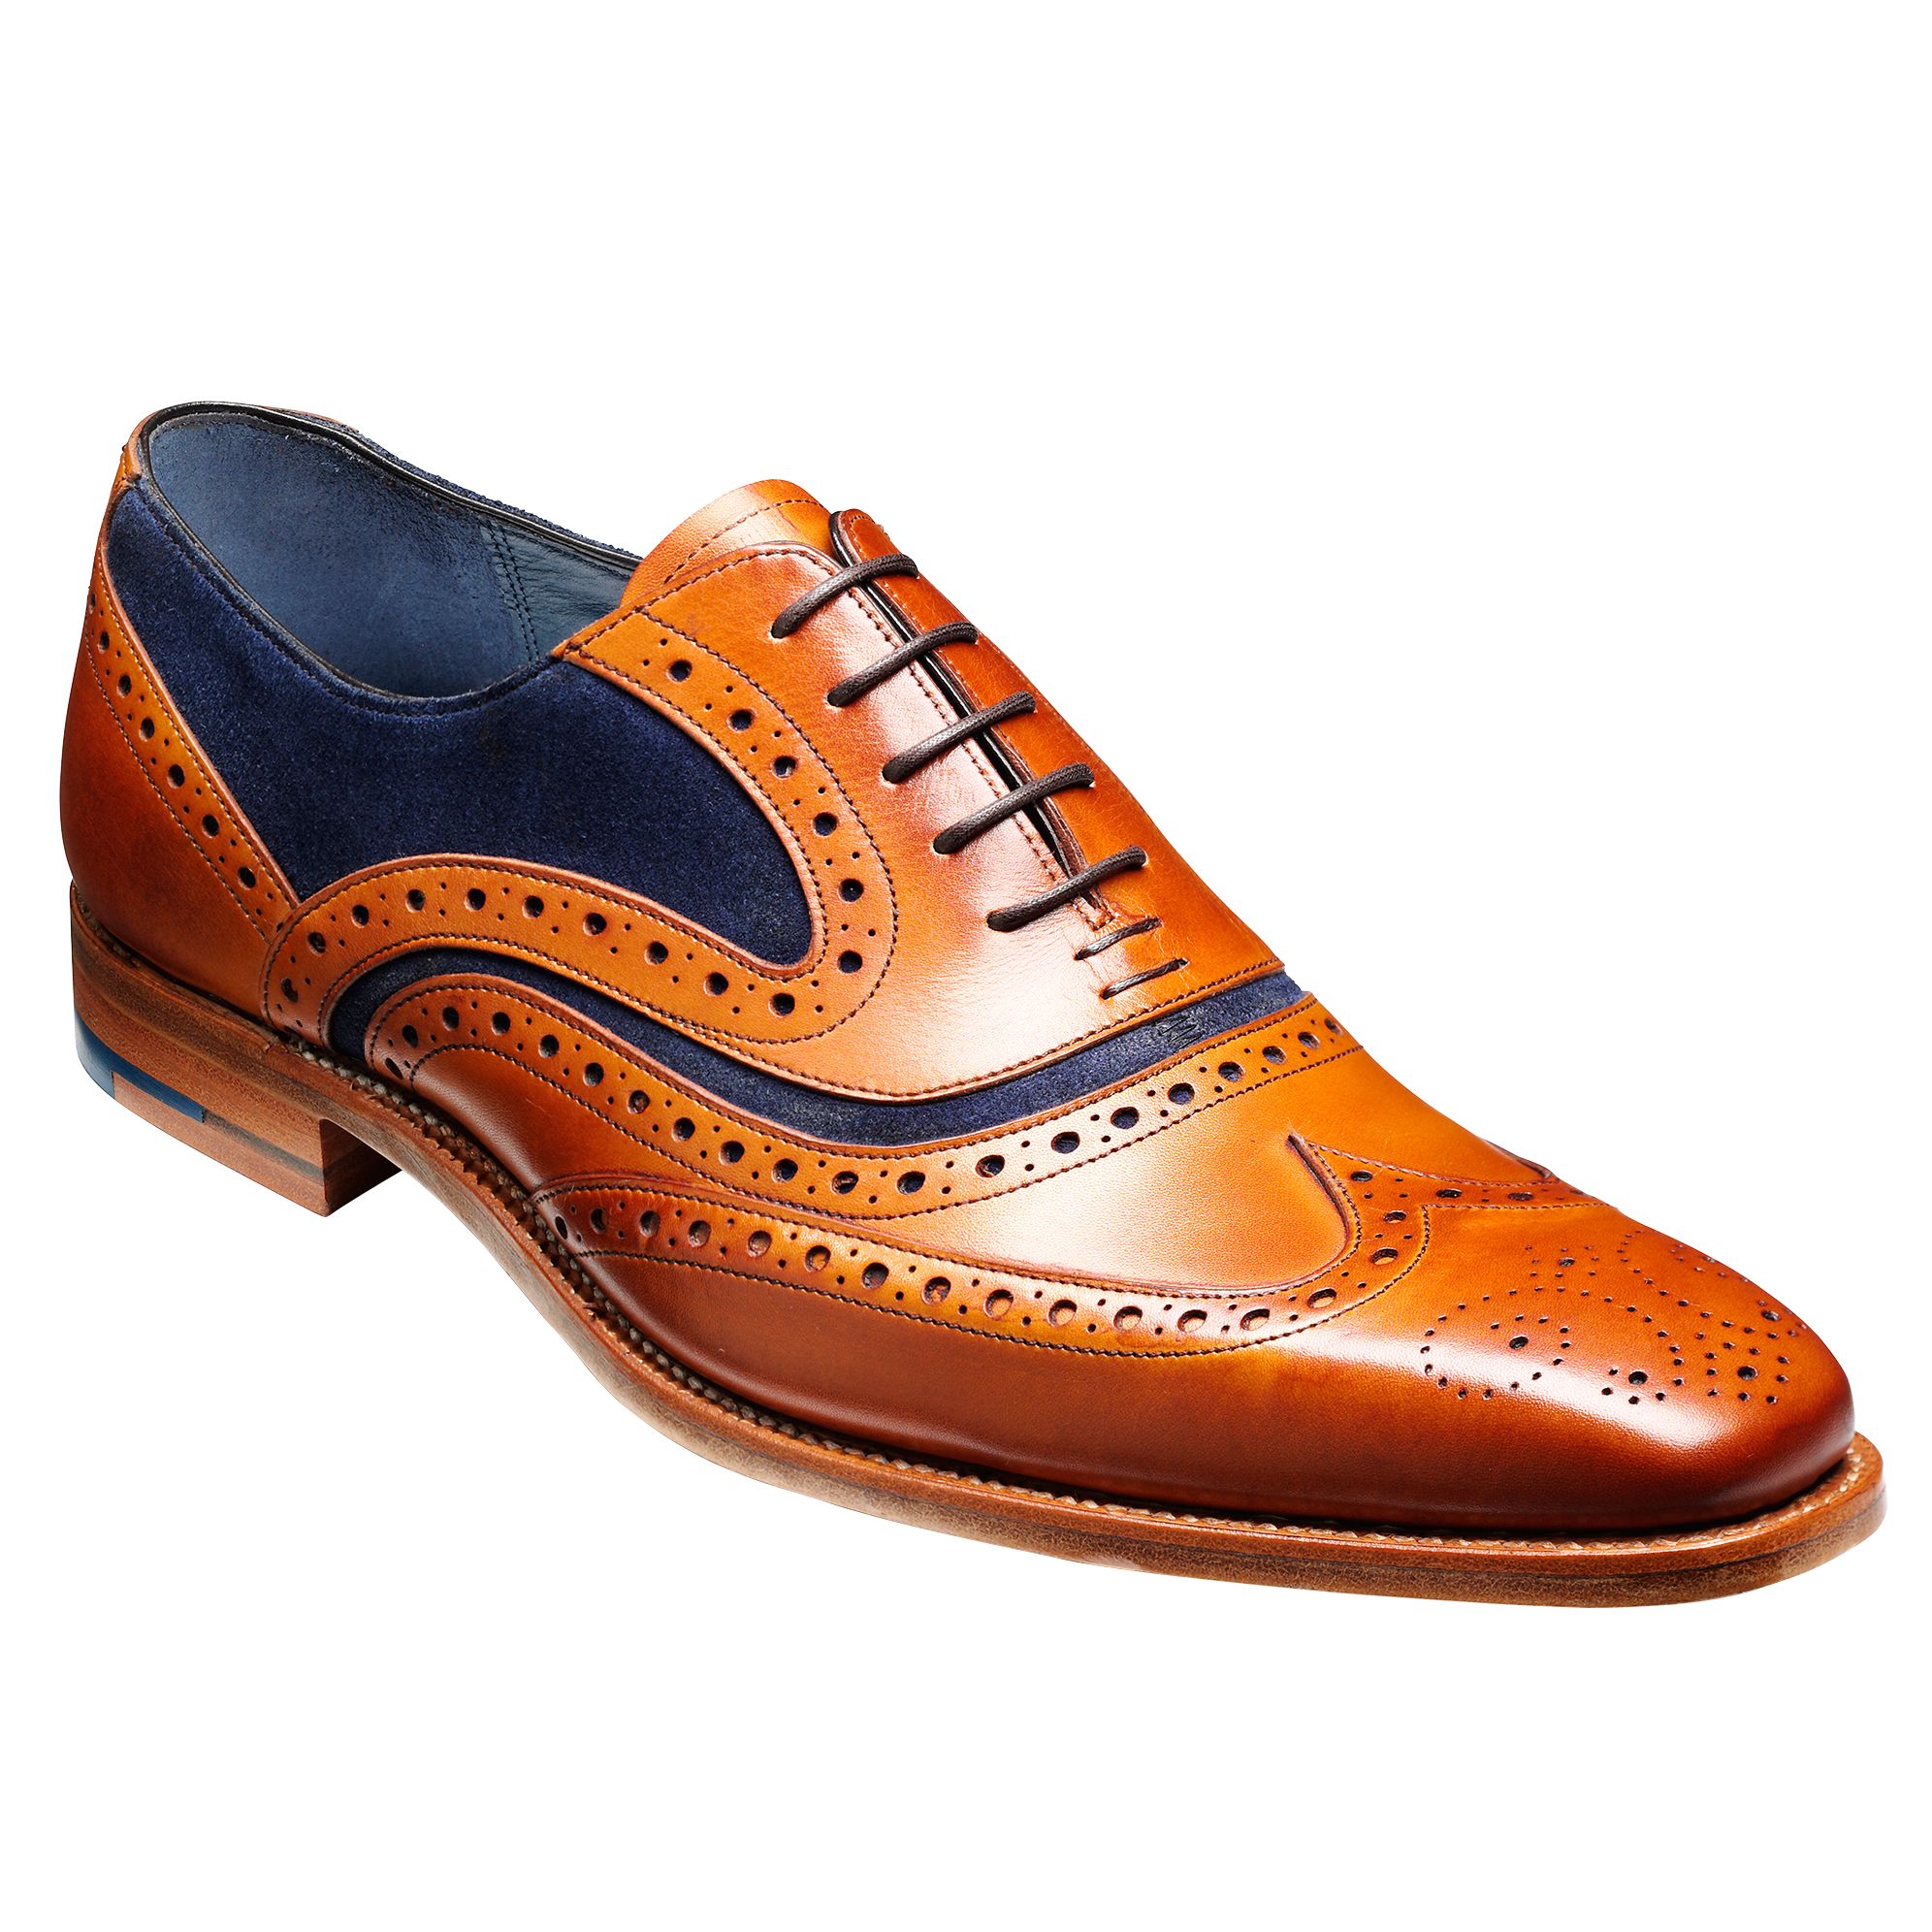 Barker McClean Goodyear Welted Leather 